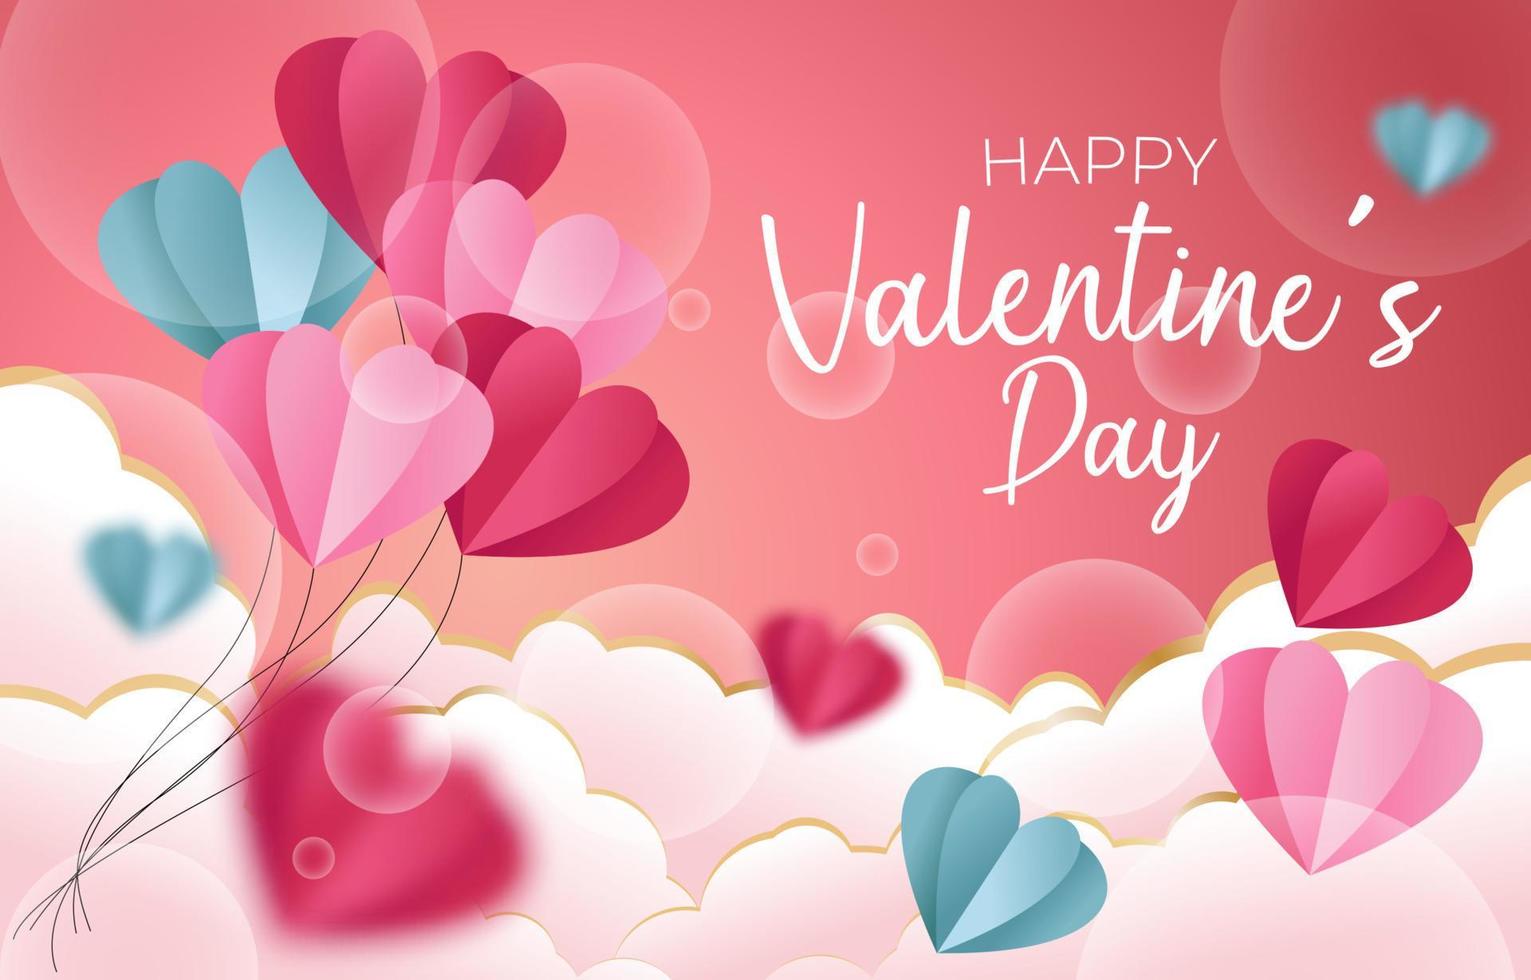 Happy Valentine Day Background with Cloud and Balloon Heart vector